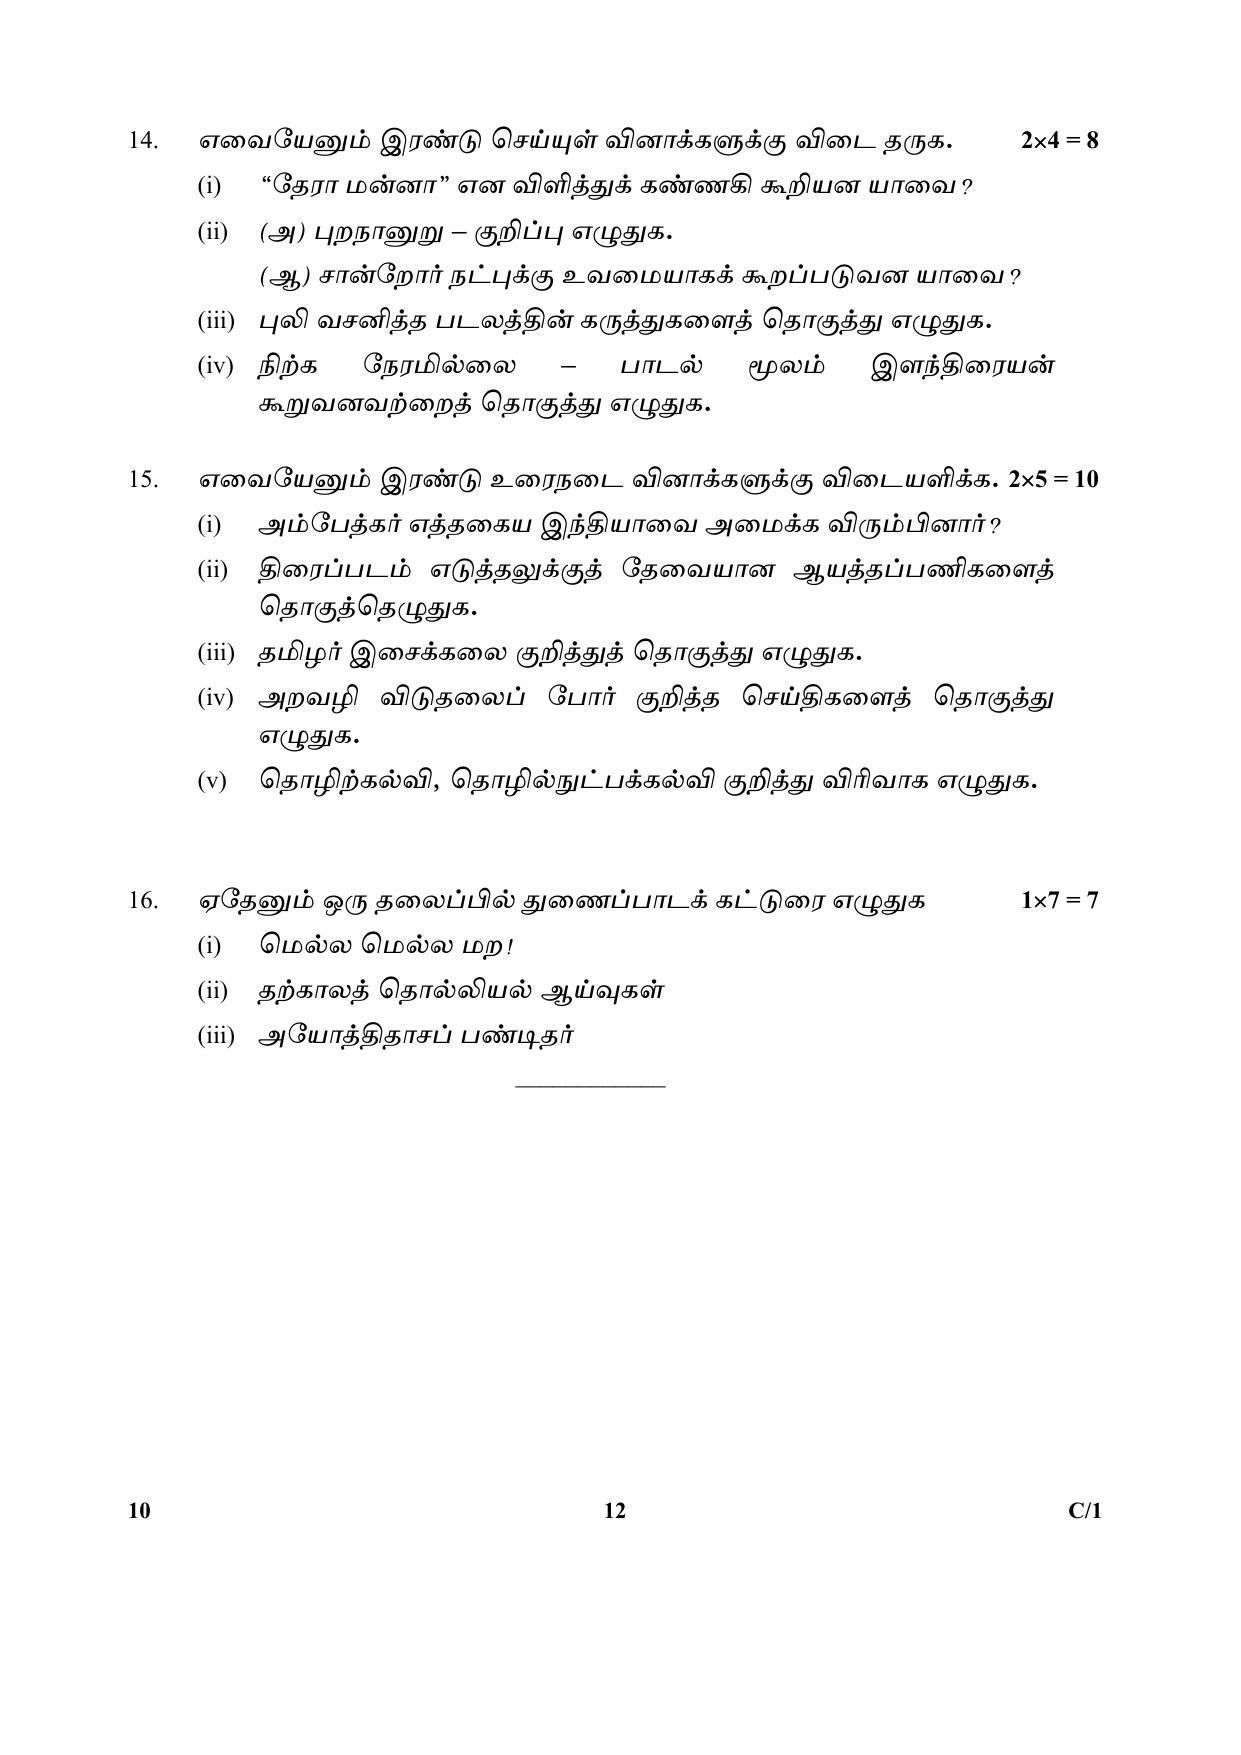 CBSE Class 10 10 (Tamil) 2018 Compartment Question Paper - Page 12